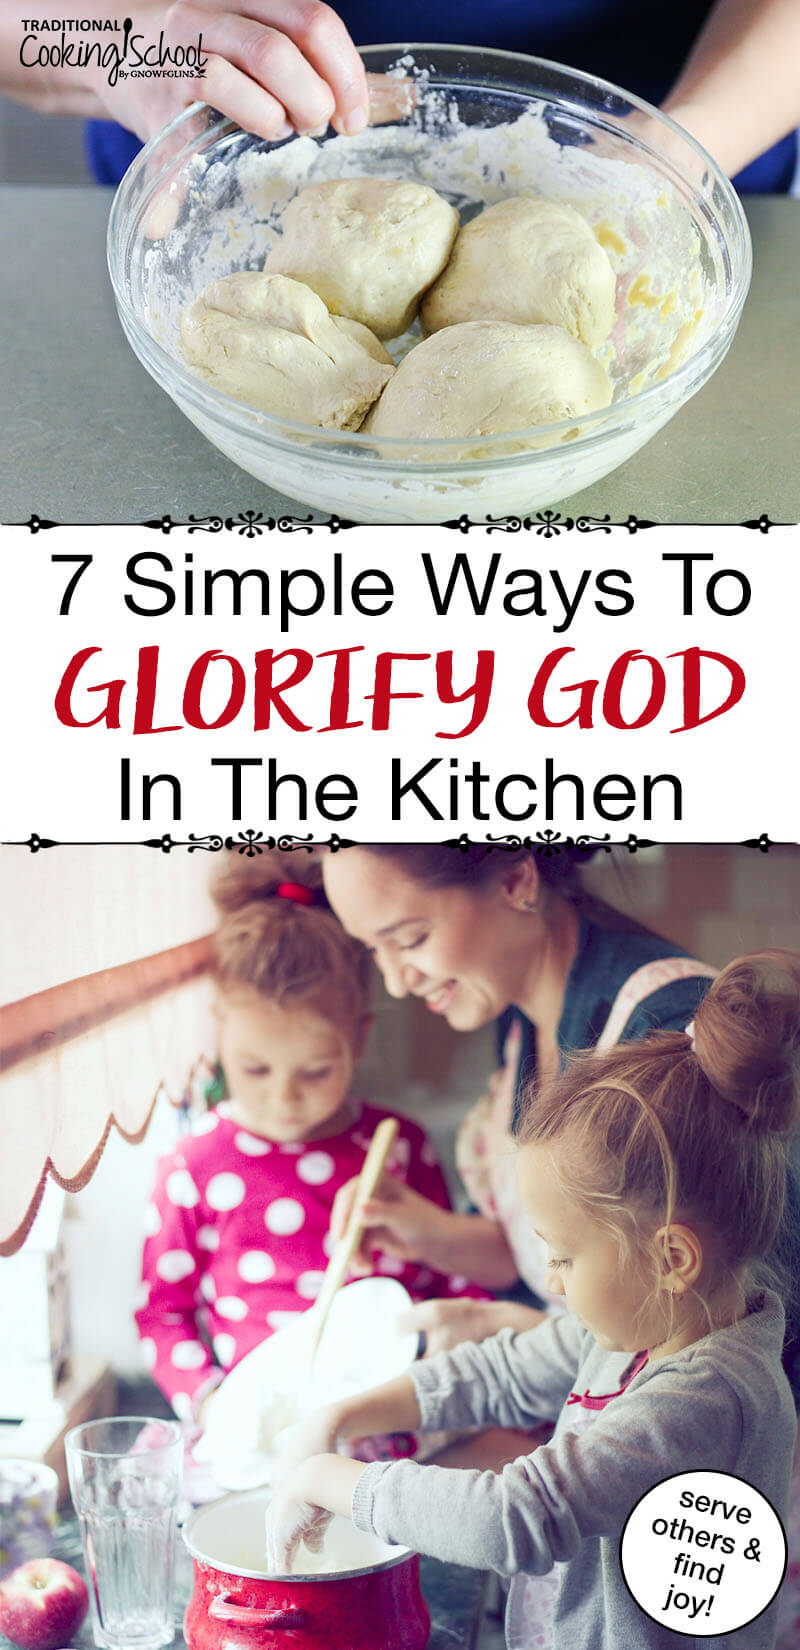 photo collage of mother and daughters working in the kitchen together, and a bowl of dough balls, with text overlay: "7 Simple Ways To Glorify God In The Kitchen (serve others & find joy!)"